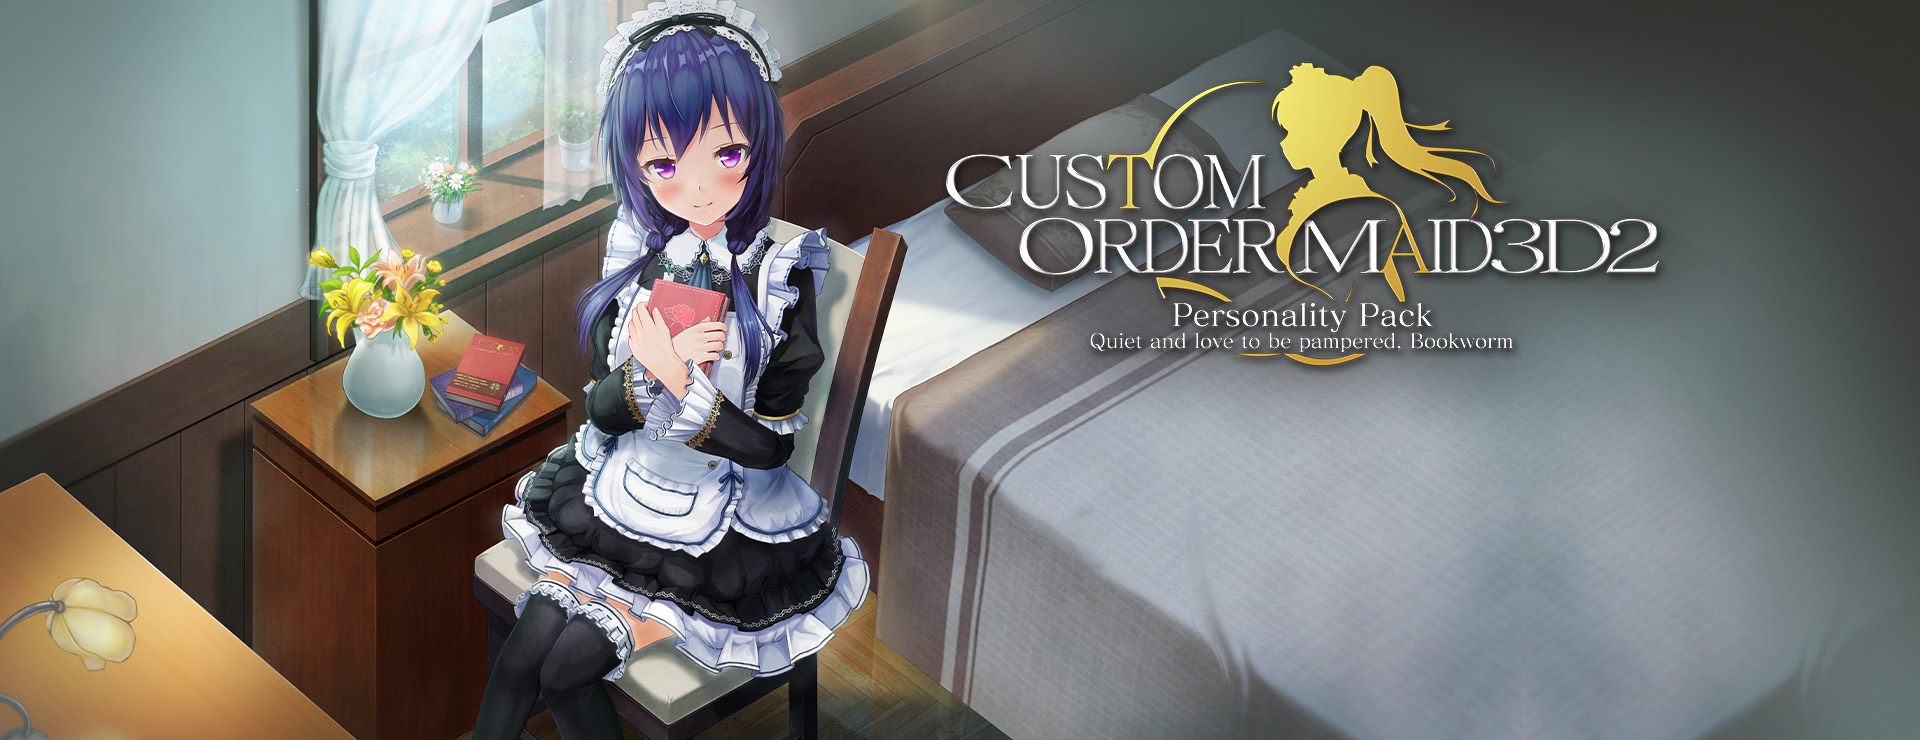 Custom Order Maid 3D2 - Quiet and Love to be Pampered Bookworm DLC - Simulation Jeu